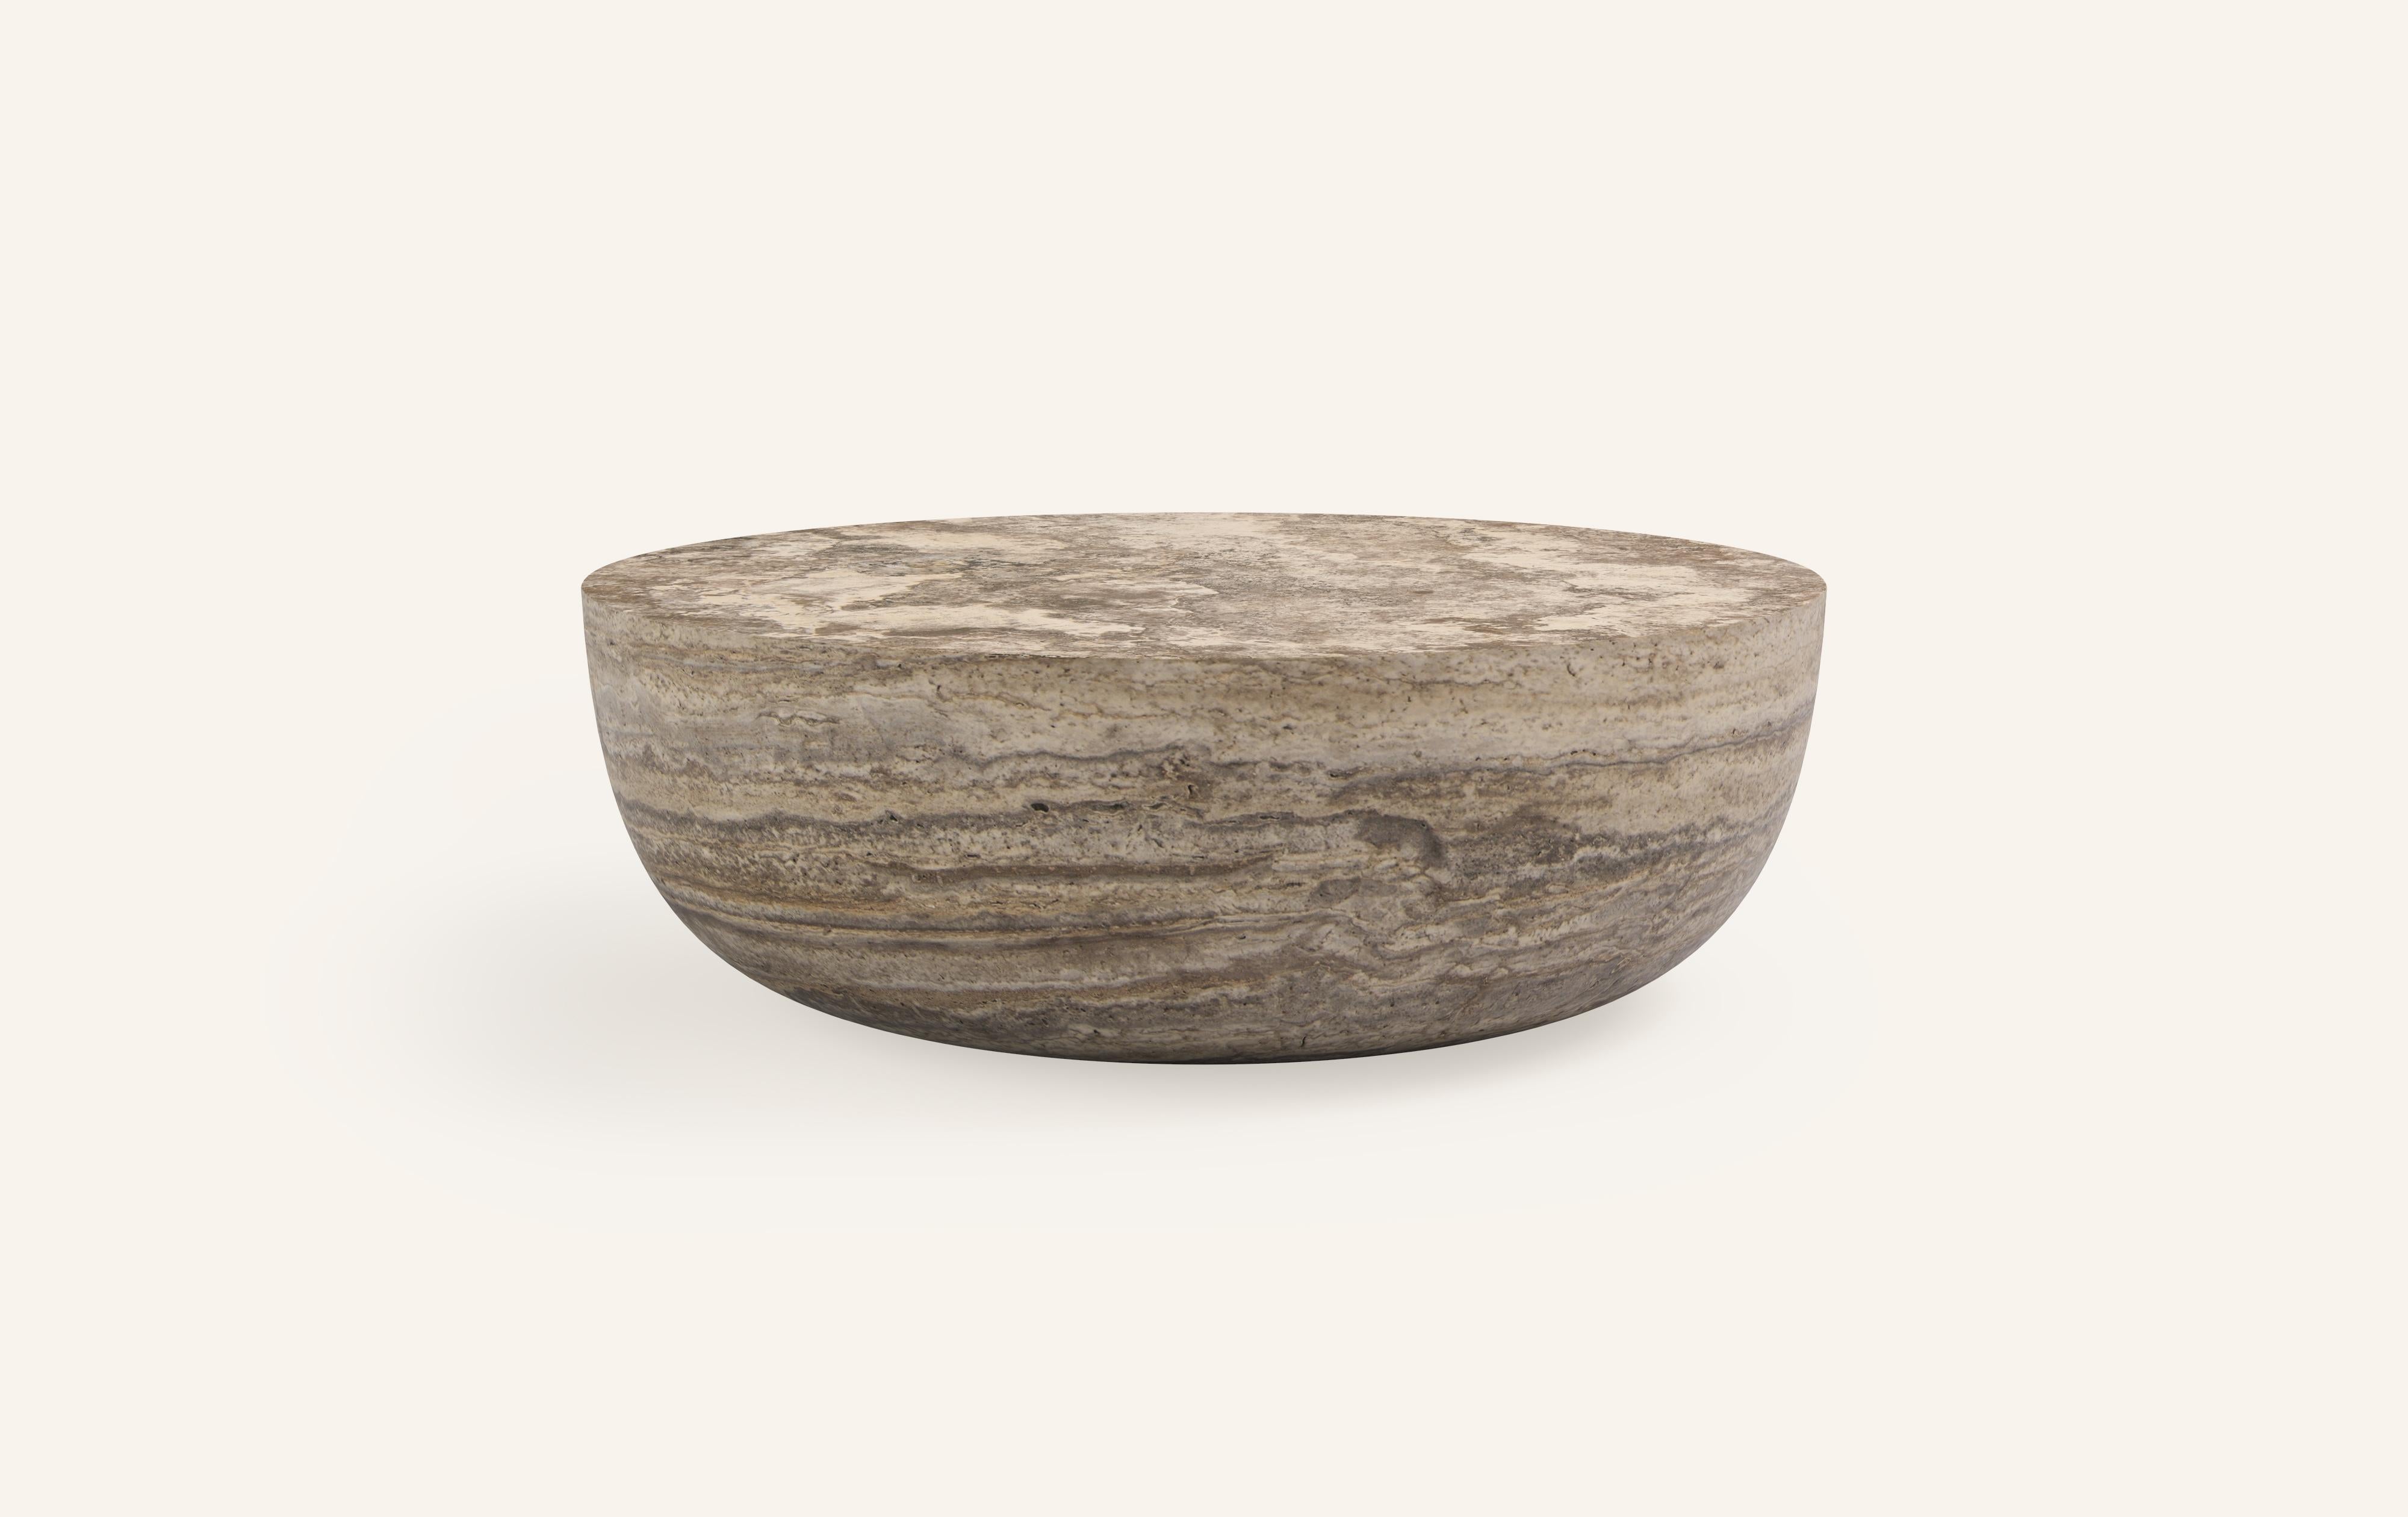 A SLICE OF A ’SPHERE’ OR 'SFERA' IN ITALIAN BALANCES A FLAT SURFACE ATOP AND ROBUST MONOLITH FORM. WITH A BASE SOFTENED BY A CURVED PROFILE, SFERA IS SOFT AND EARTHY IN ITS AVAILABLE STONE SELECTIONS.

DIMENSIONS: 
60”L x 60”W x 16”H: 
- SOLID